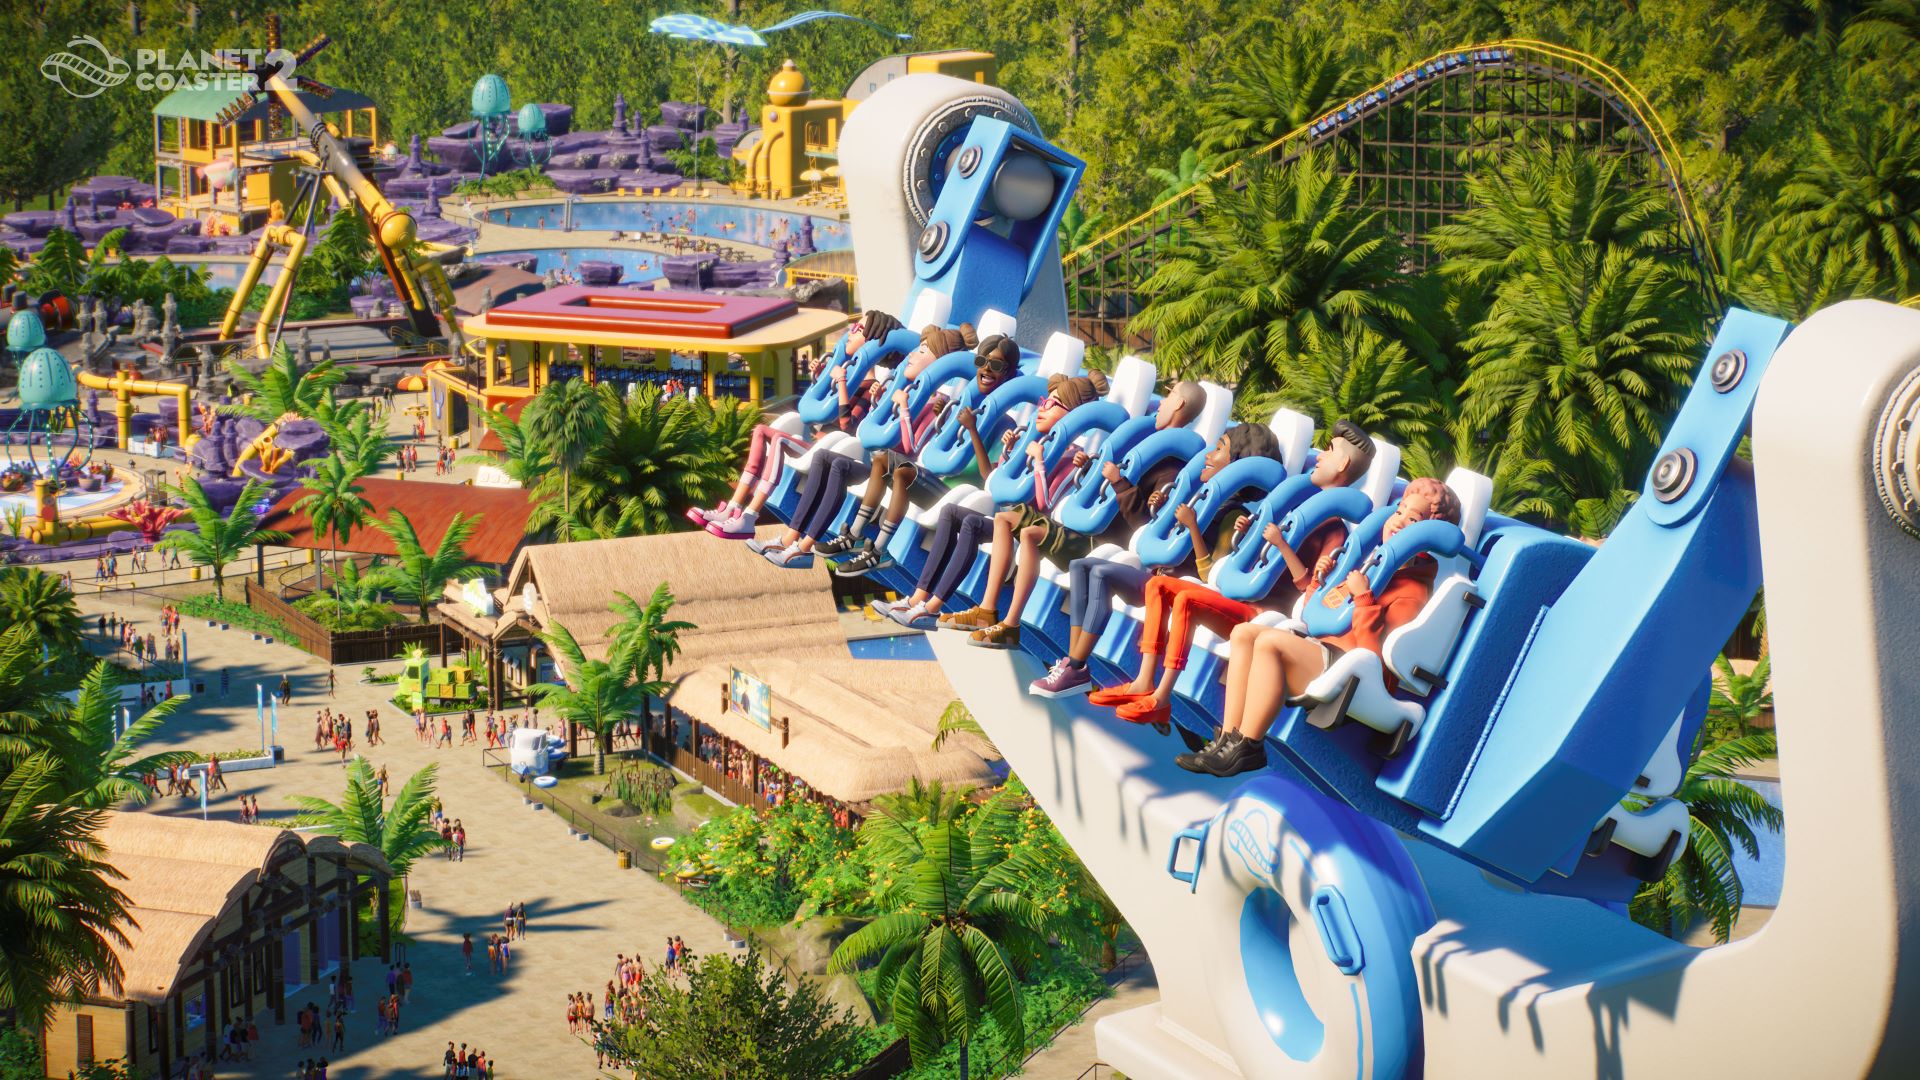 Makes A Splash with the Waterpark Of Your Dreams in Planet Coaster 2